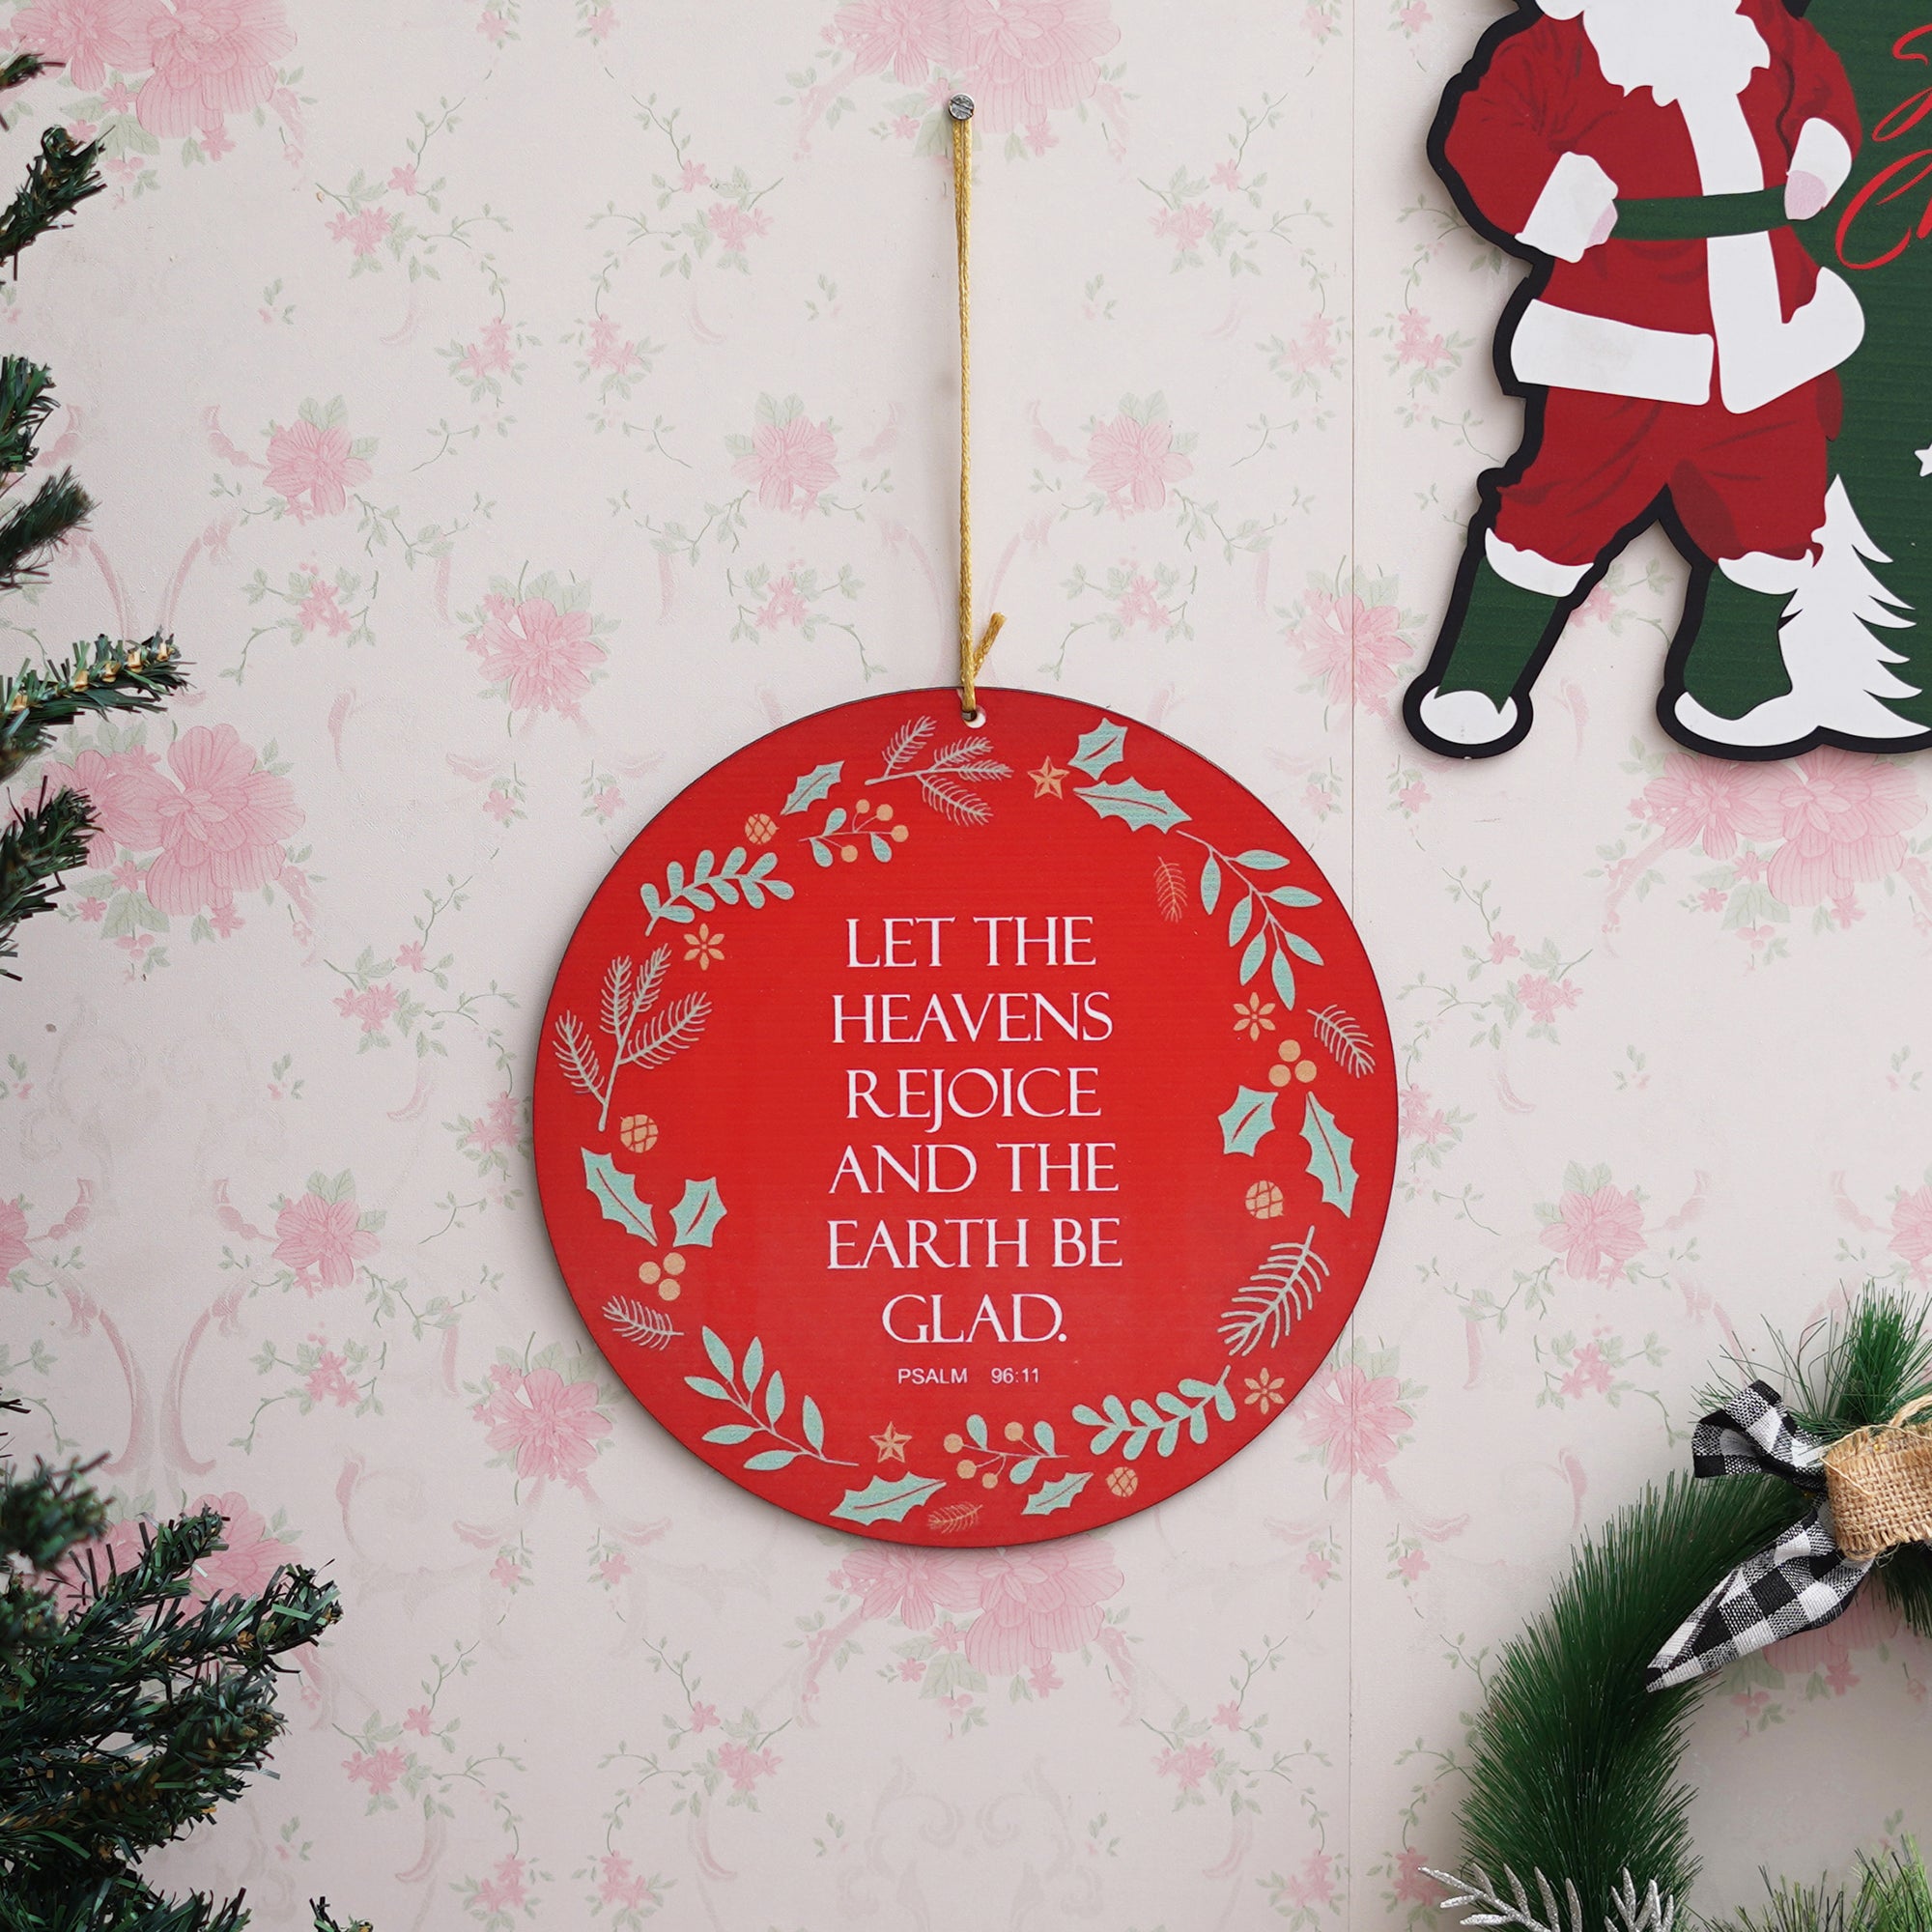 eCraftIndia "LET THE HEAVENS REJOICE AND THE EARTH BE GLAD. PSALM 96:11" Printed Merry Christmas Wooden Door Wall Hanging Ornaments for Home Decoration (Red, Green, White)